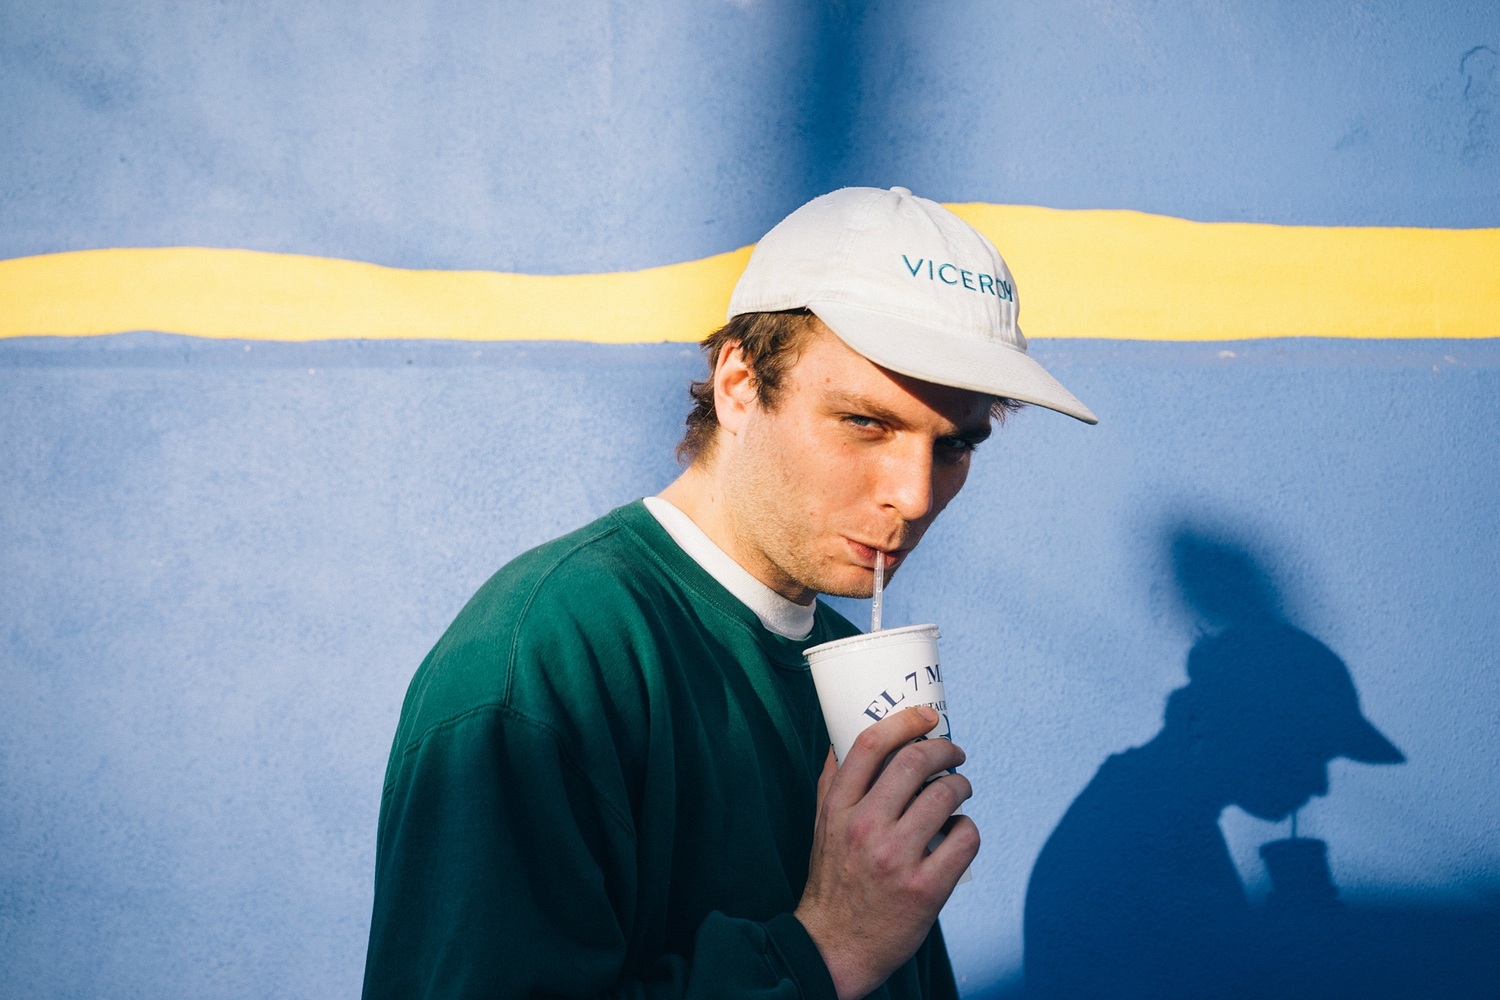 Oh god, Mac DeMarco’s got another comedy alter-ego